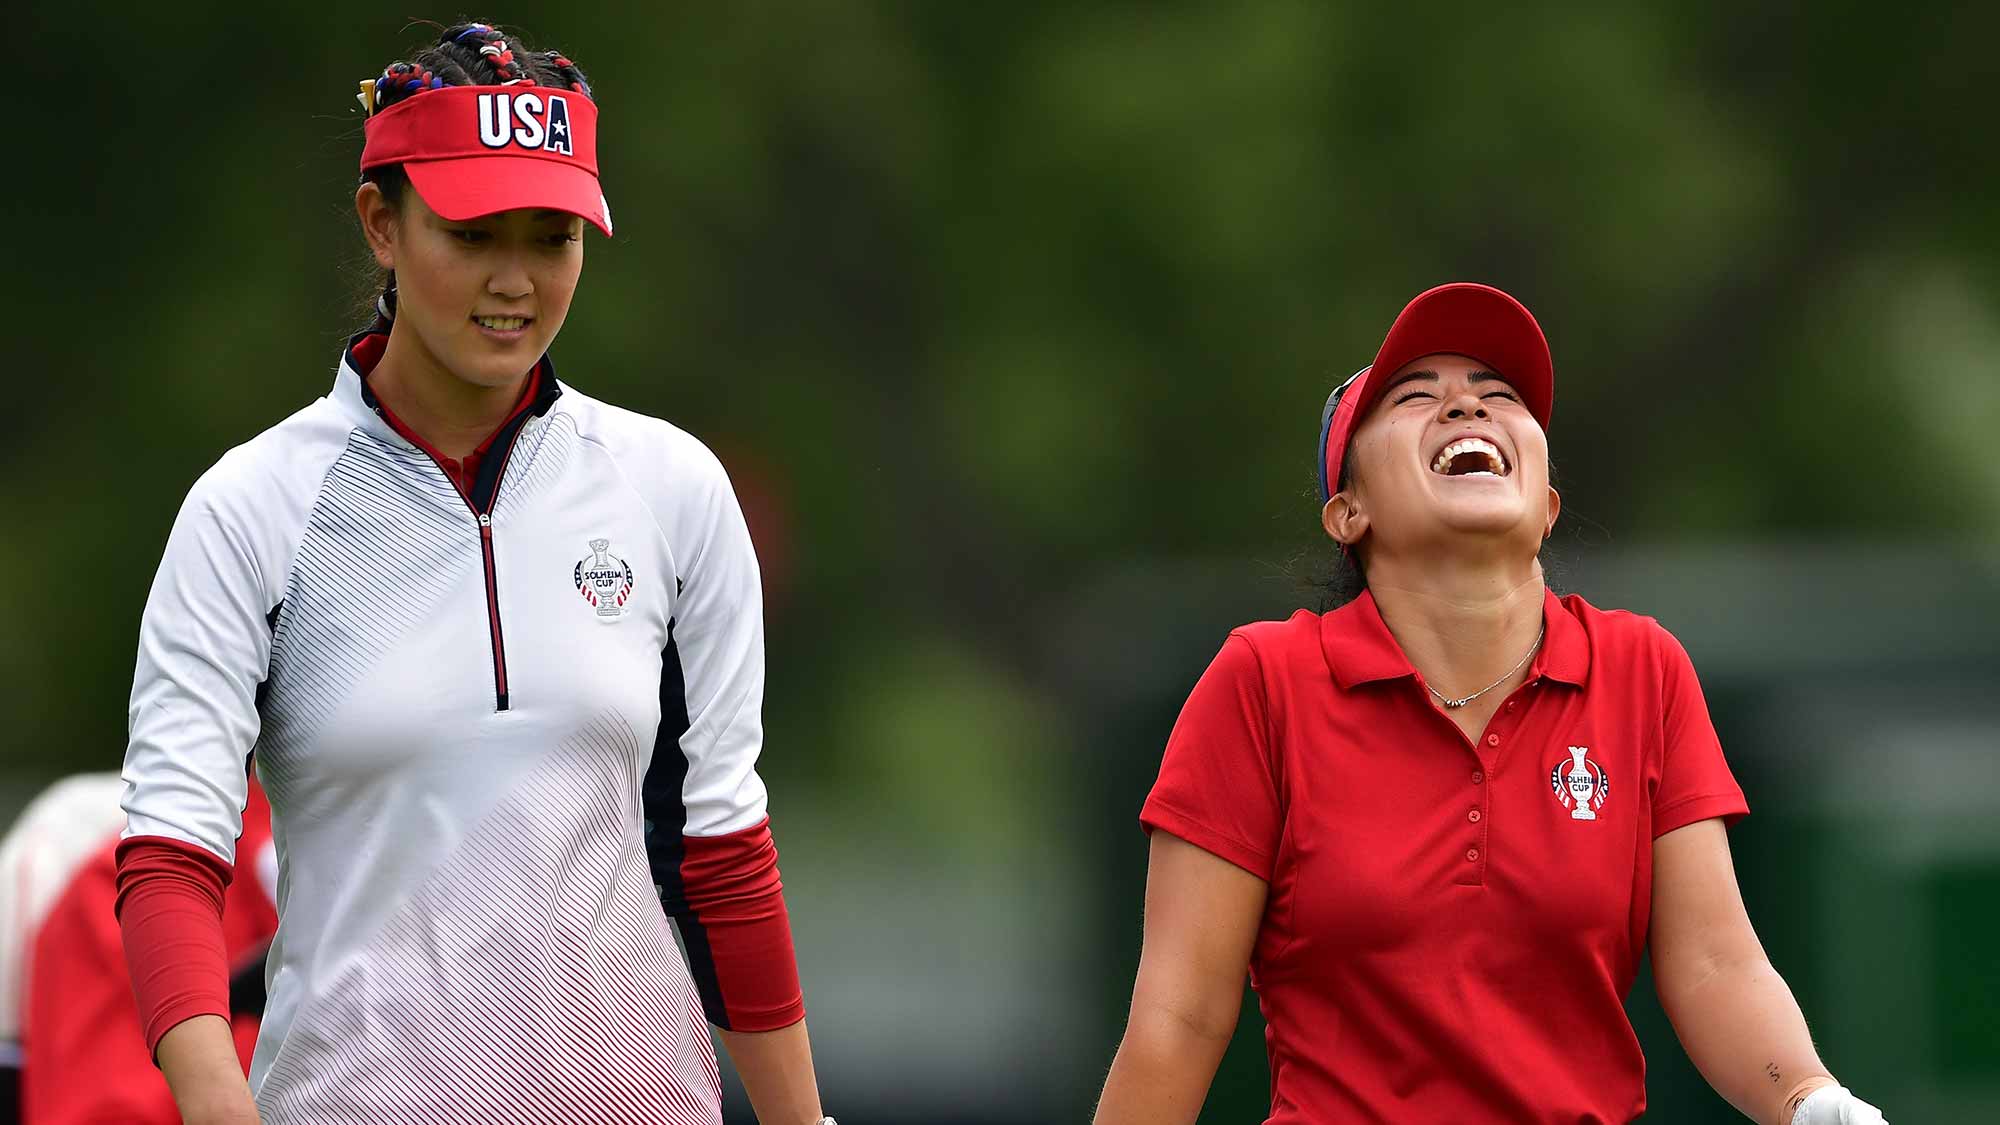 Solheim Cup Rendered Irrelevant By Asian Stars